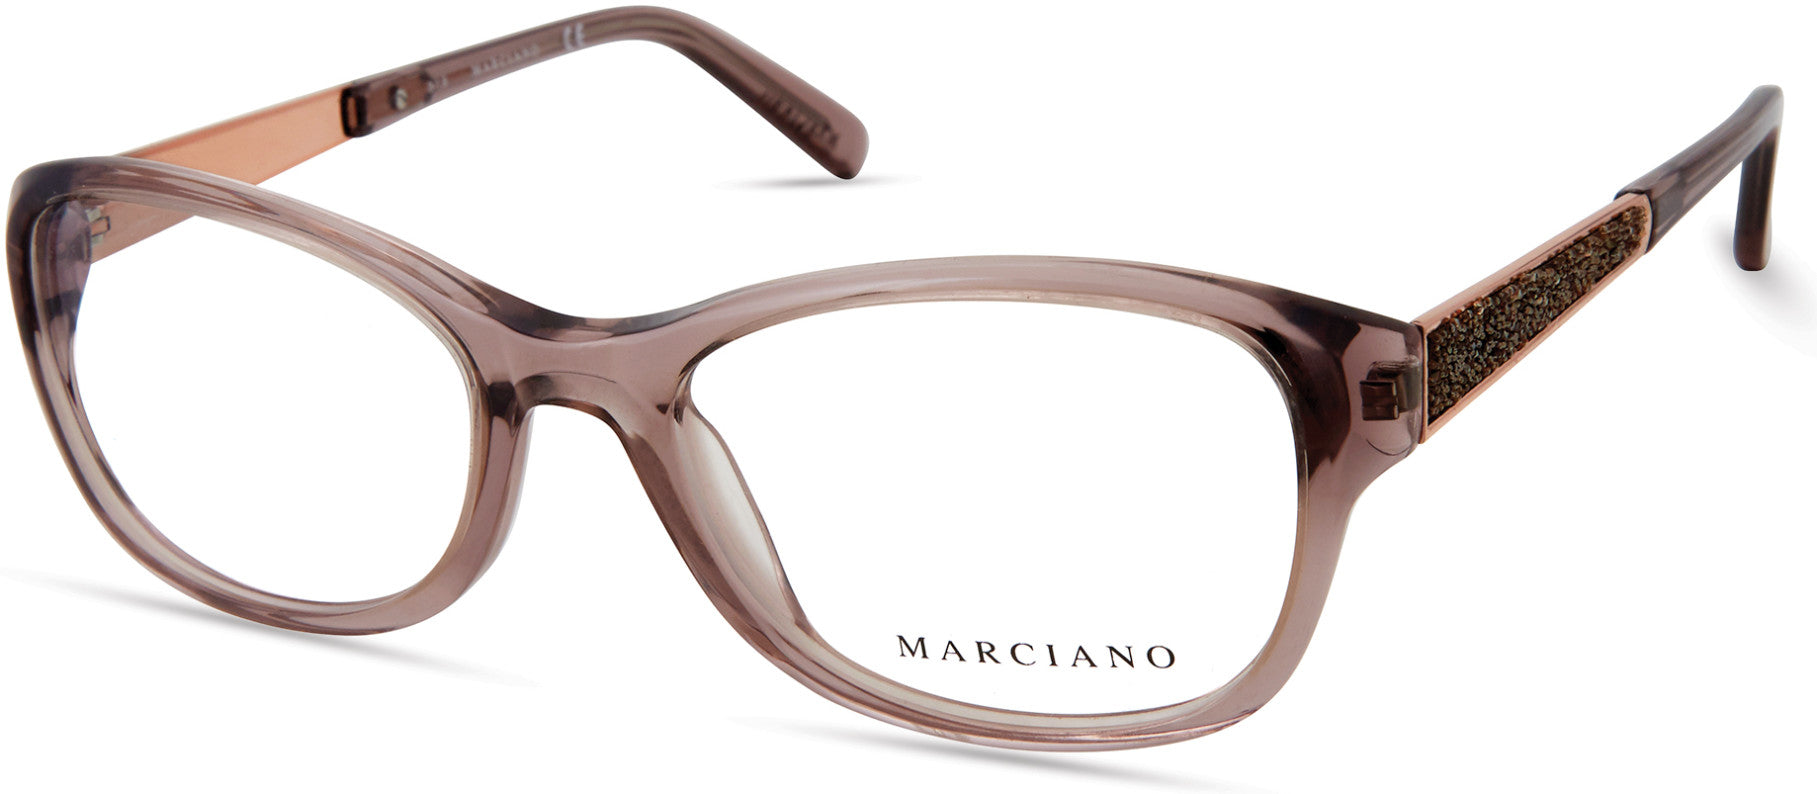 Guess By Marciano GM0355 Rectangular Eyeglasses 072-072 - Shiny Pink